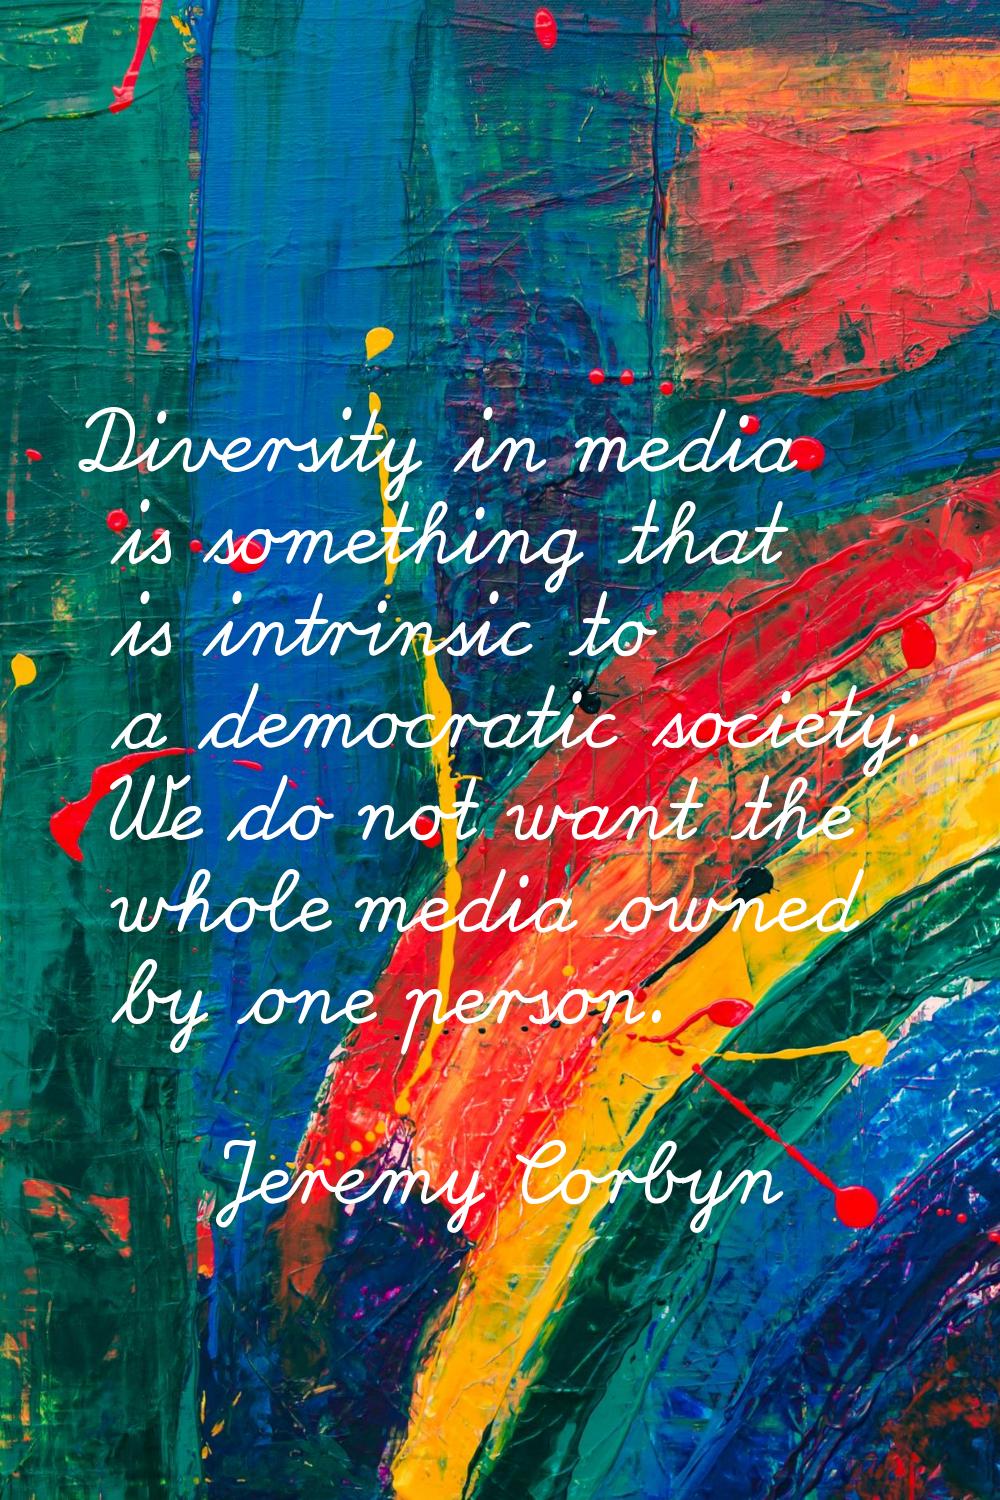 Diversity in media is something that is intrinsic to a democratic society. We do not want the whole